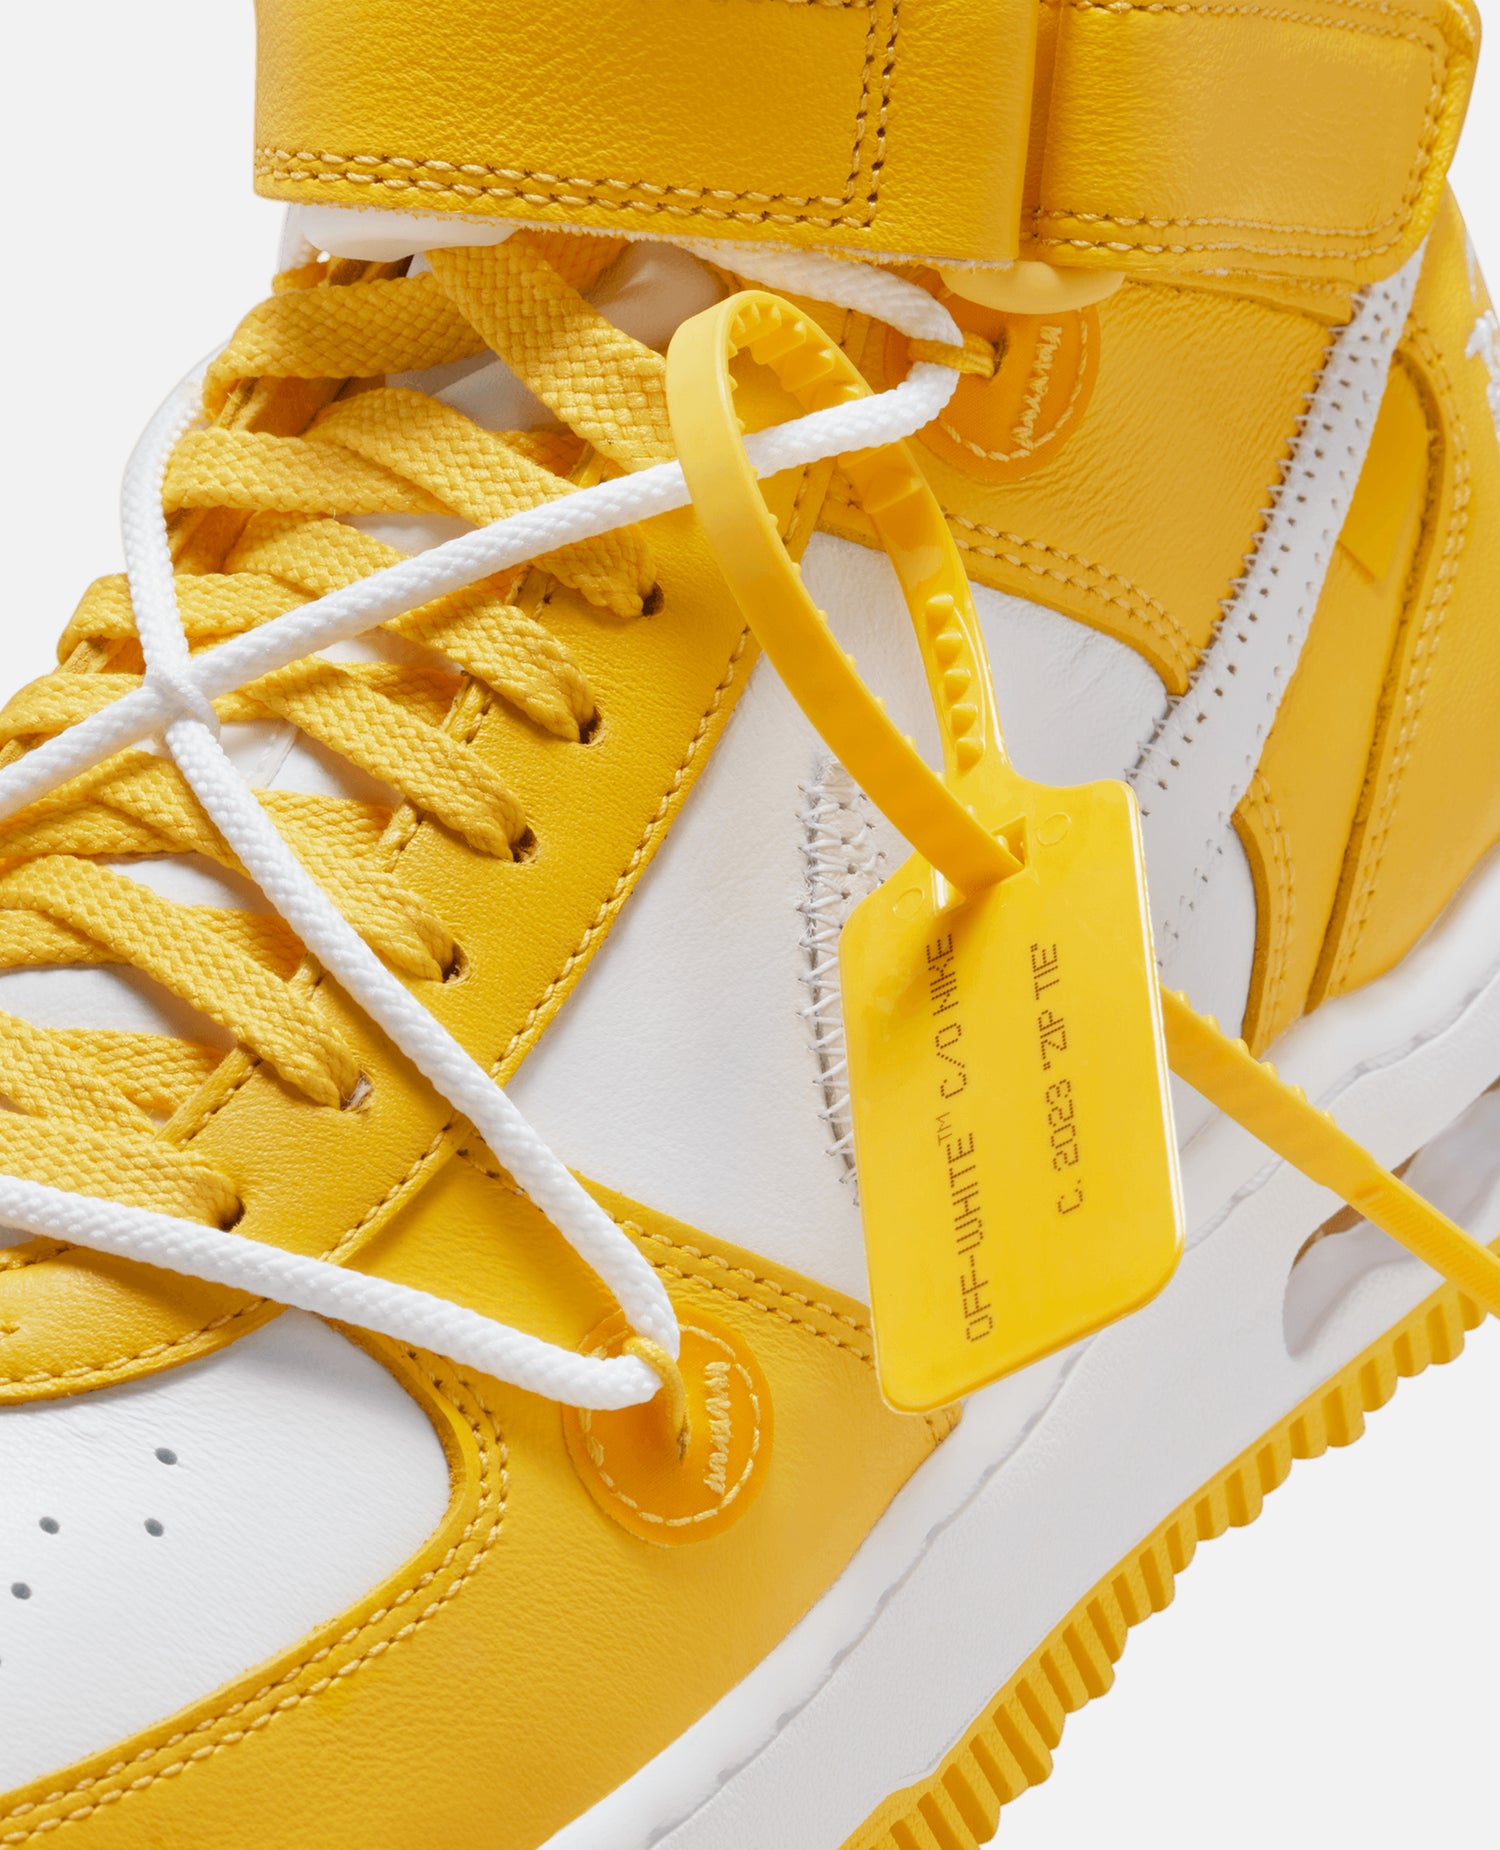 Off-White x Nike Air Force 1 Mid SP Leather (White/White-Varsity Maize)